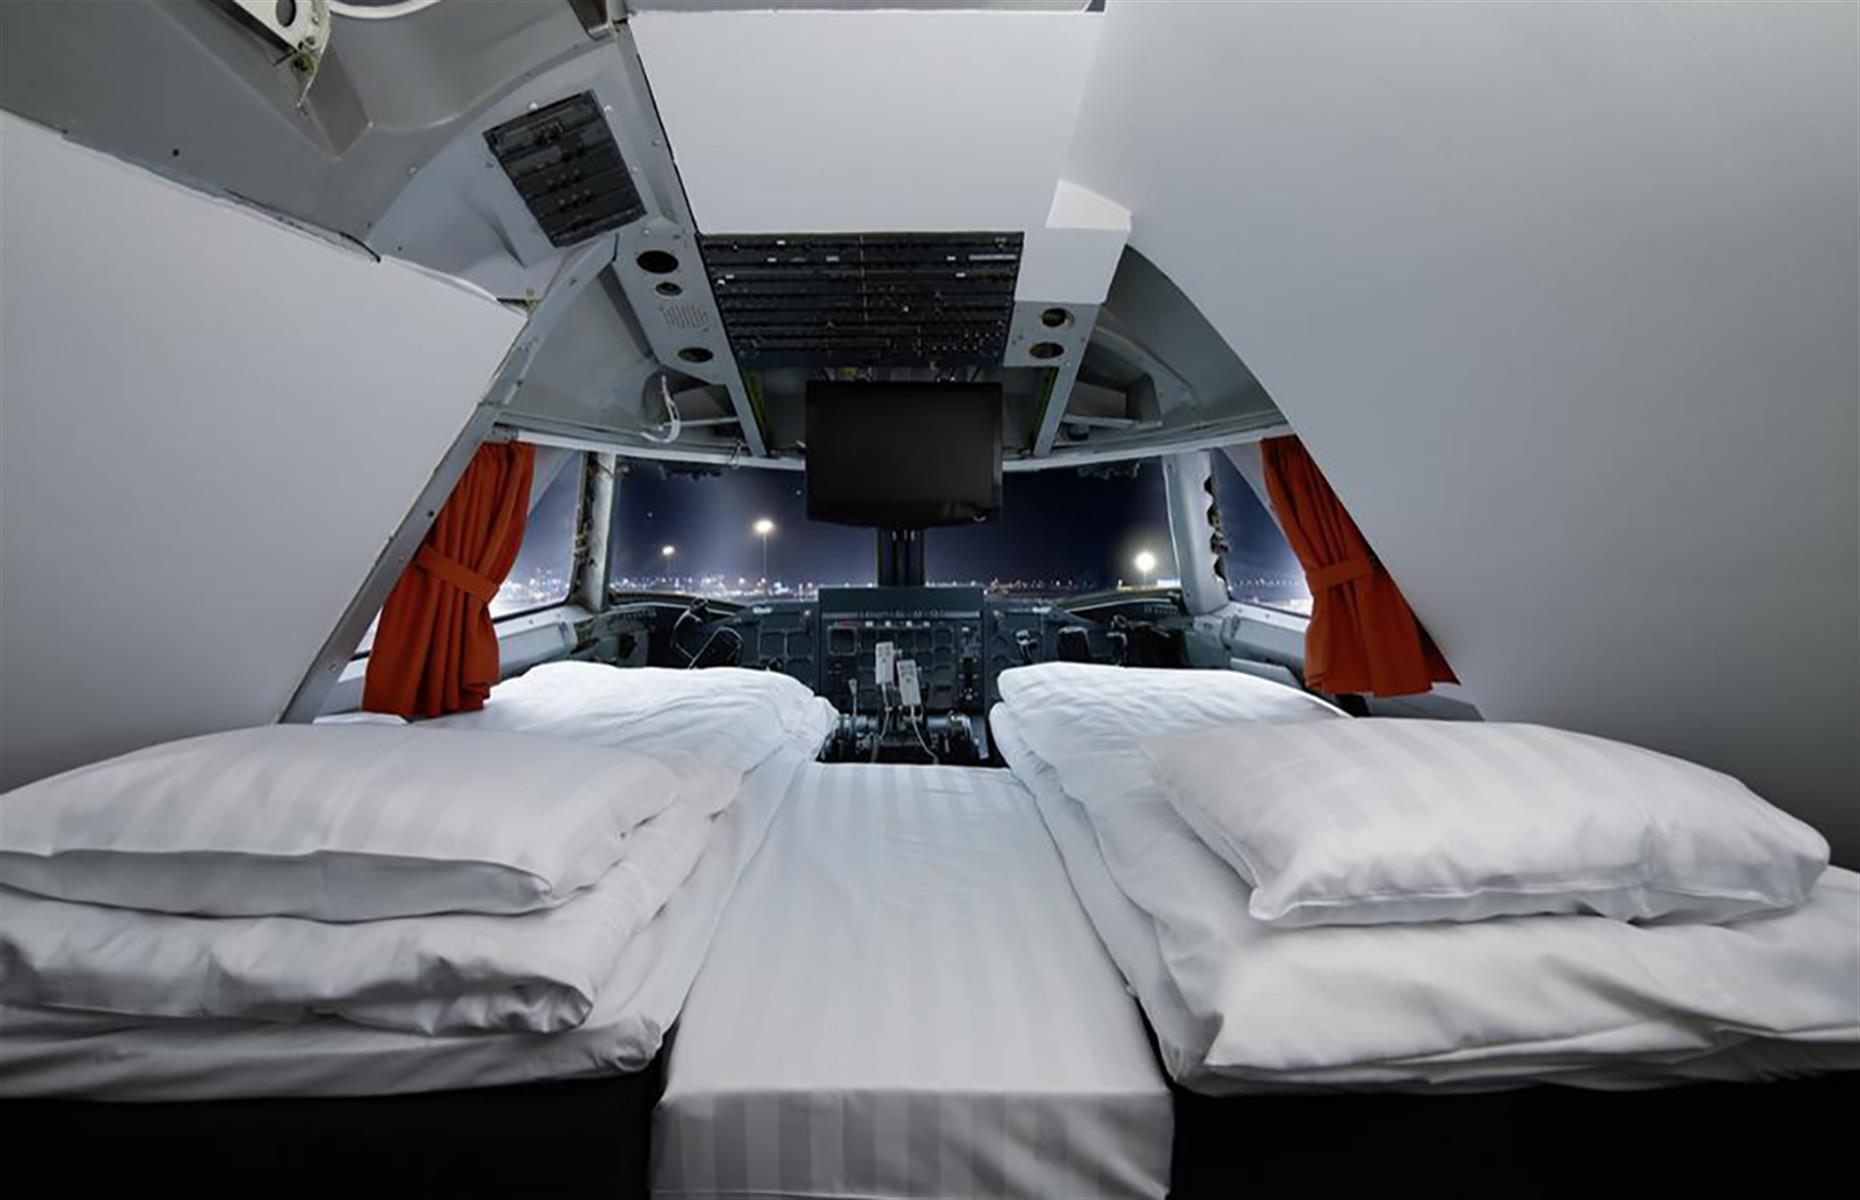 <p>Set in a former Boeing 747 jumbo jet, <a href="https://www.booking.com/hotel/se/jumbo-hostel.en-gb.html" rel="nofollow” target=">STF Jumbo Stay Stockholm</a> is certainly one-of-a-kind. For the ultimate plane experience, book the cockpit suite and enjoy a restful night's sleep among the dials, levers and control wheels. Traveling alone or looking to shut the world out? There are four single cabins inside the former jet turbines too. </p>